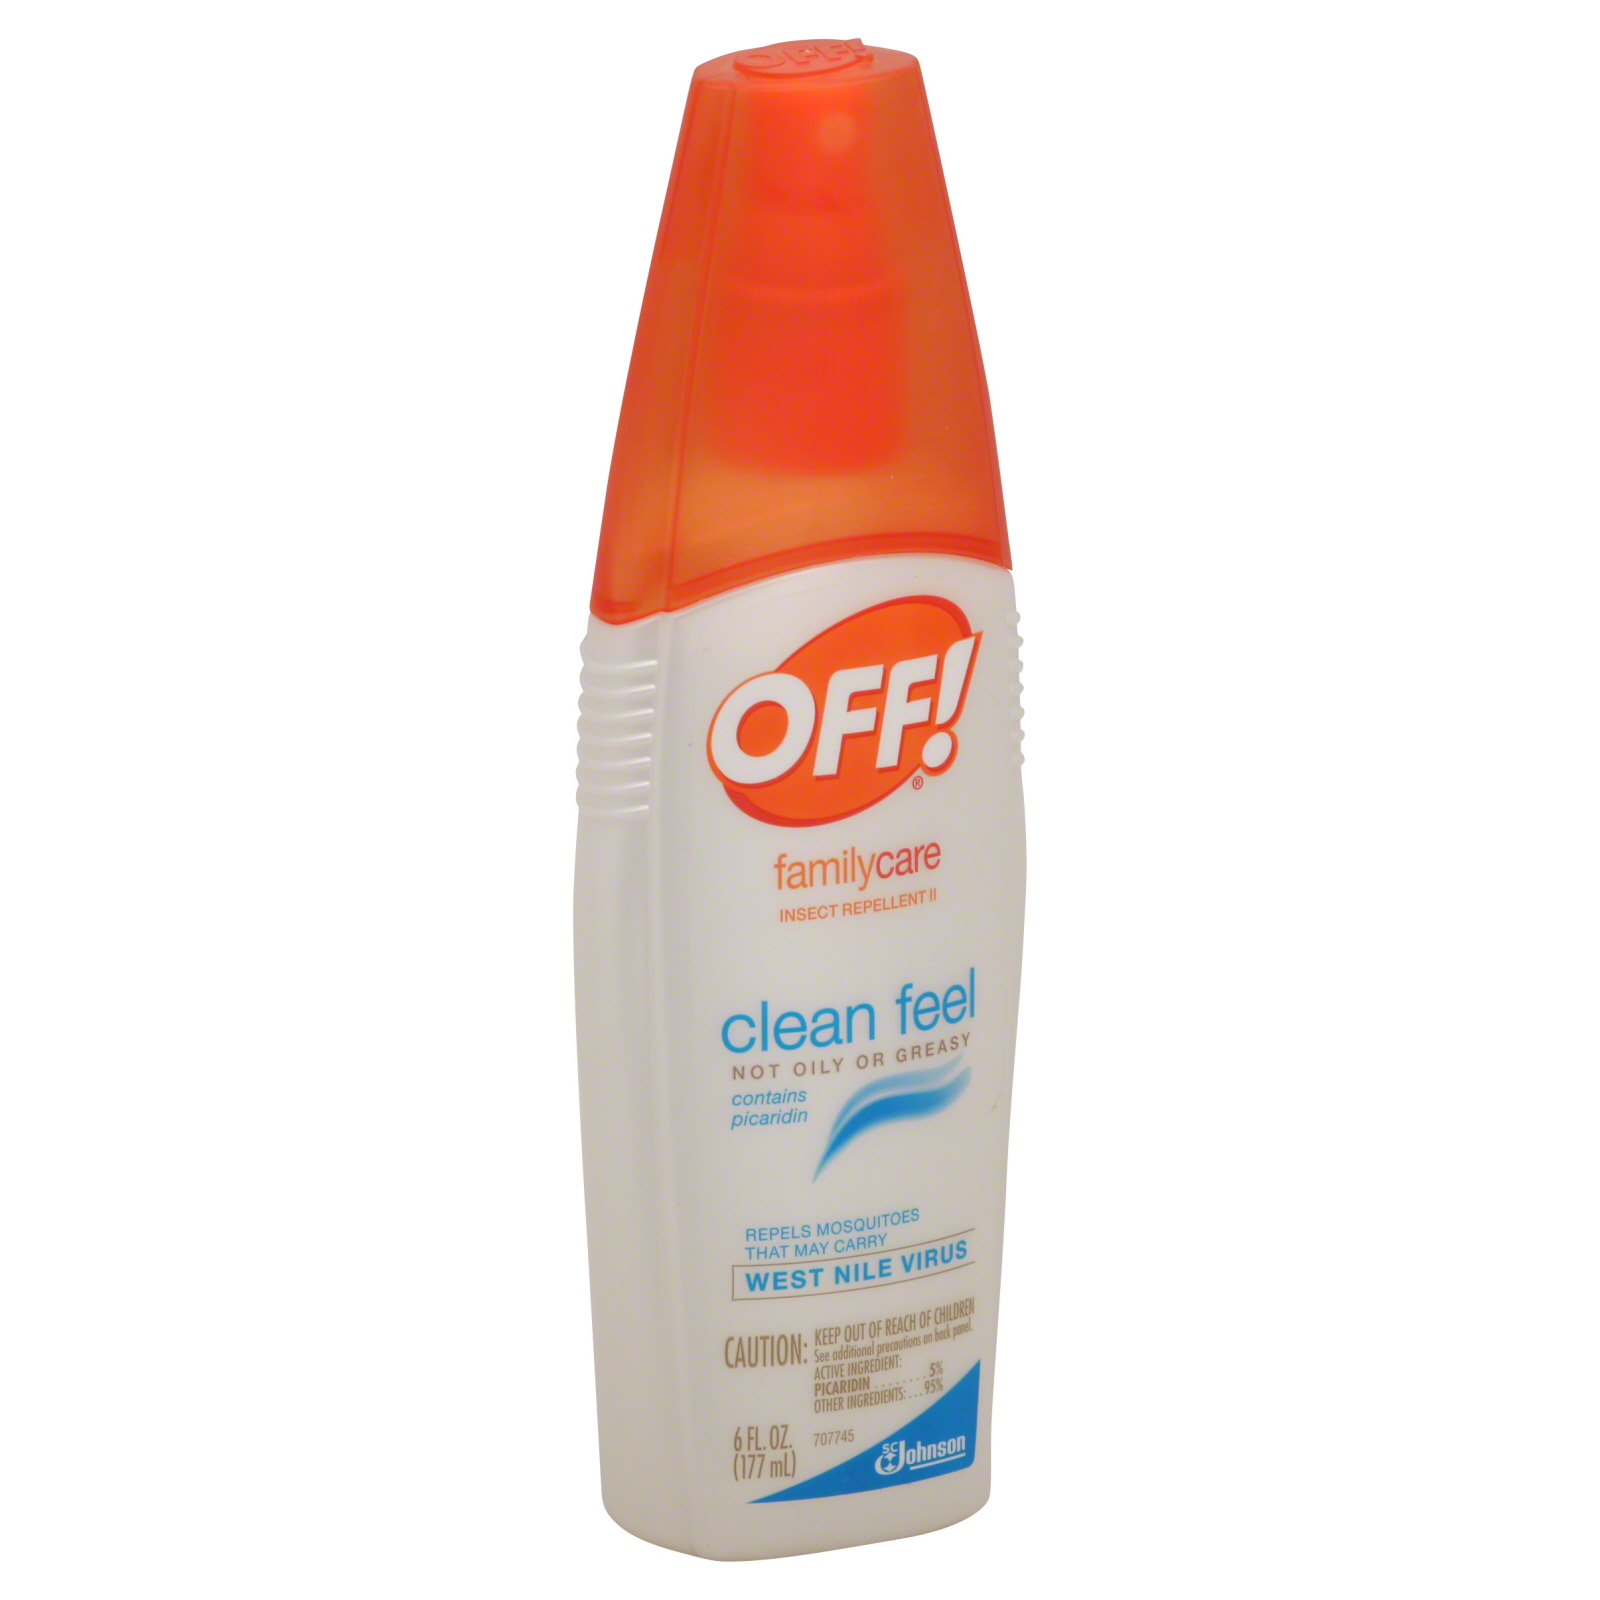 Off! FamilyCare Insect Repellent II, Clean Feel, 6 fl oz (177 ml)